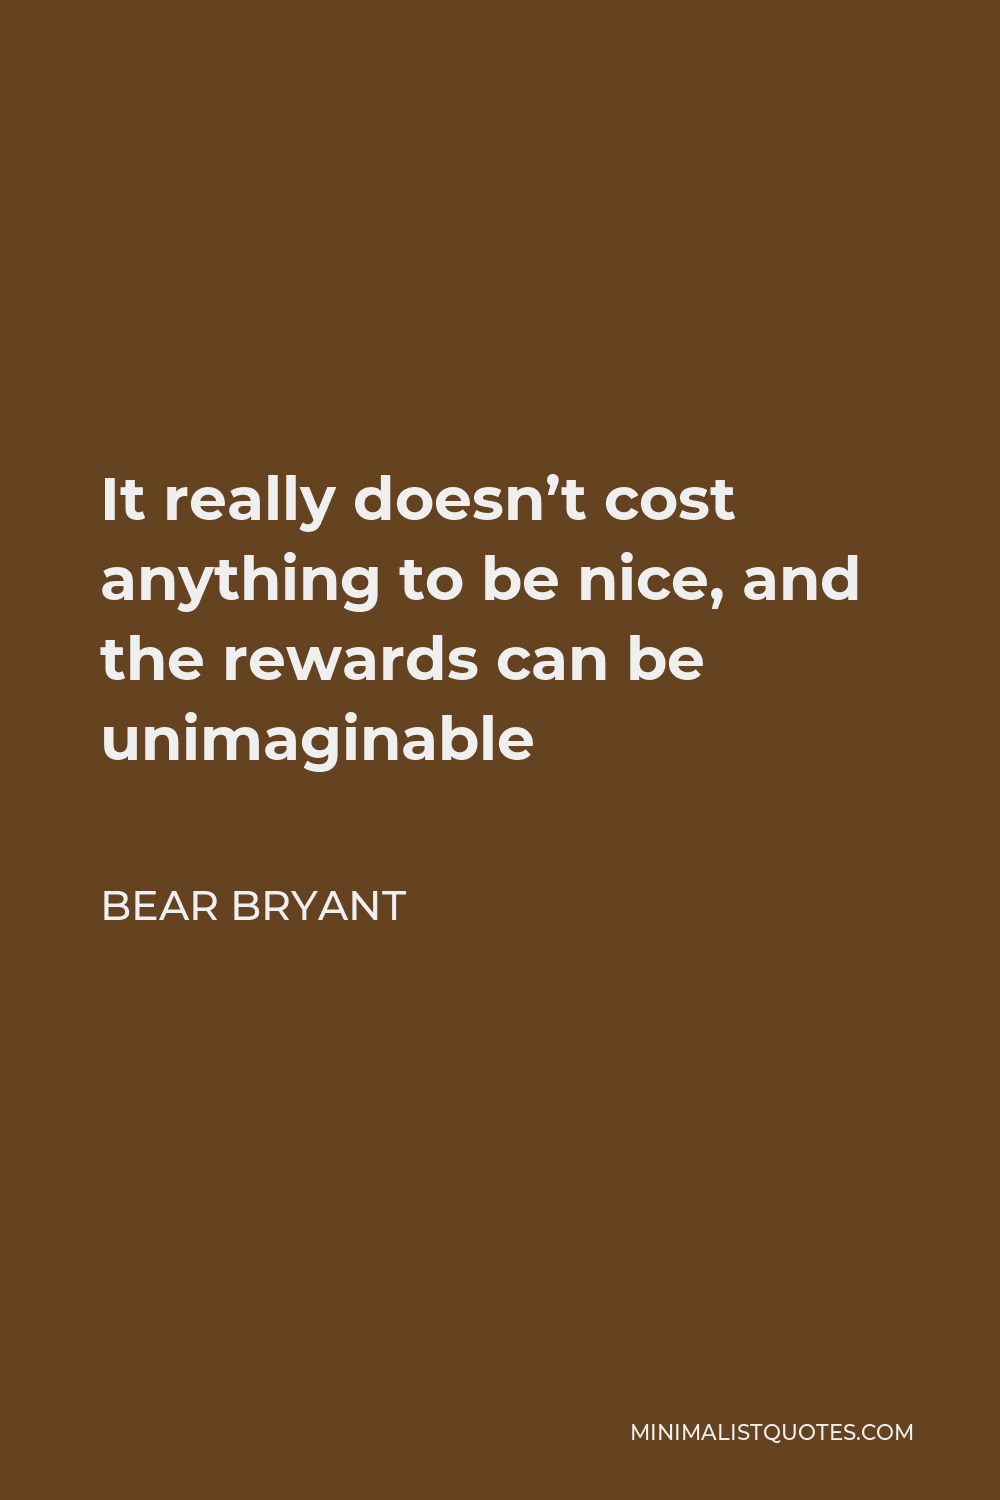 Bear Bryant Quote - It really doesn’t cost anything to be nice, and the rewards can be unimaginable